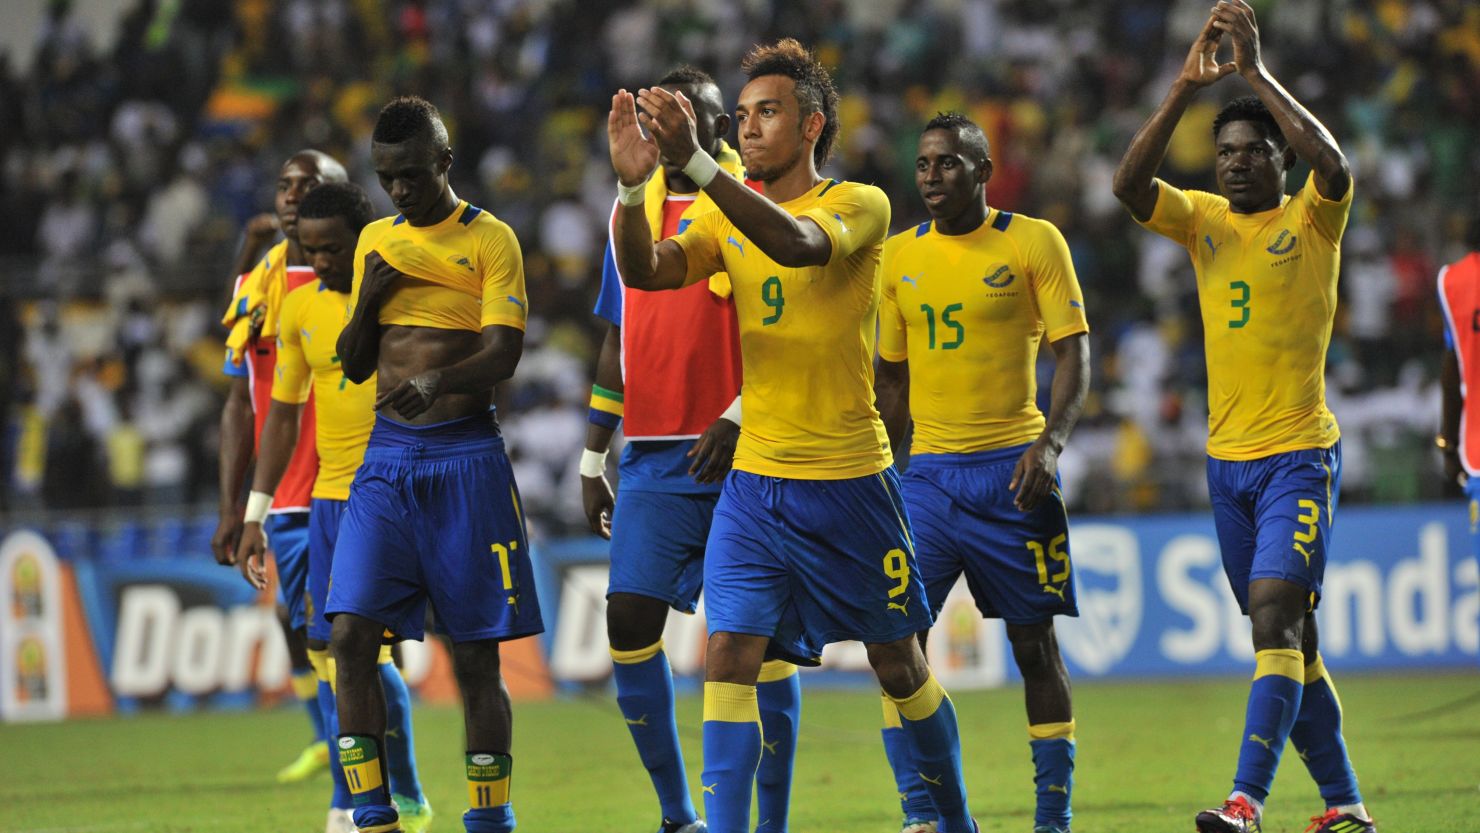 Gabon players, led by opening scorer Pierre-Emerick Aubameyang (No.9), celebrate their 2-0 victory over Niger.